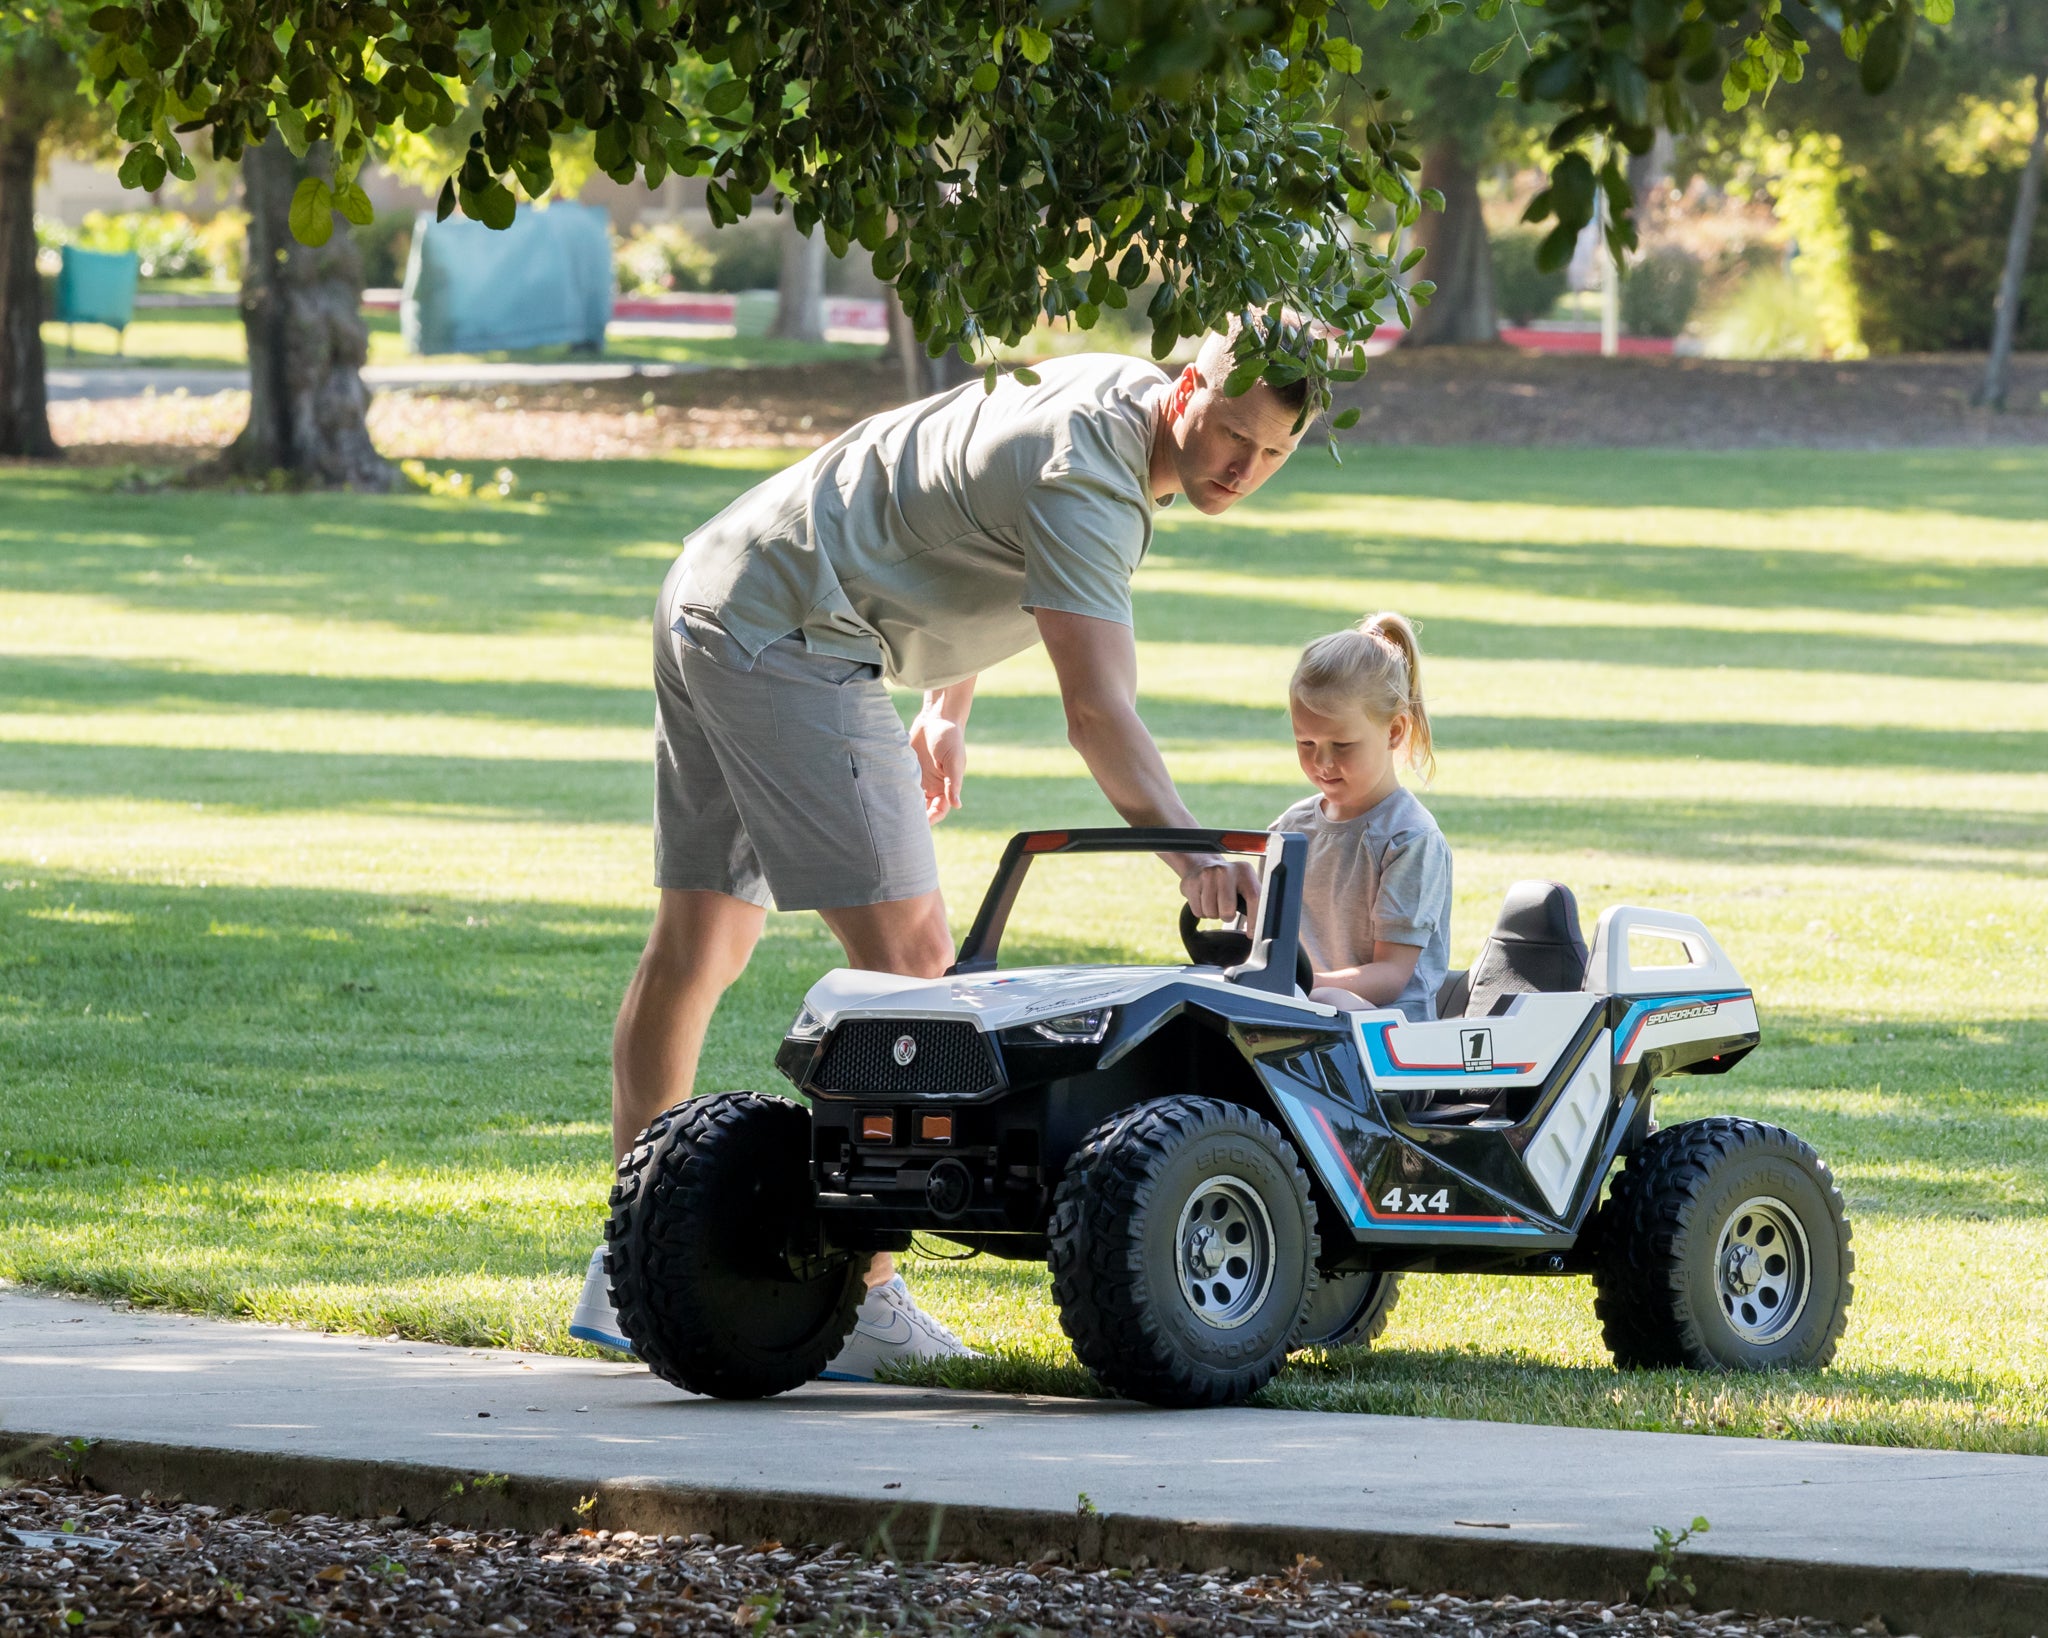 Safe and Fun: How to Supervise Kids During Electric Car Play